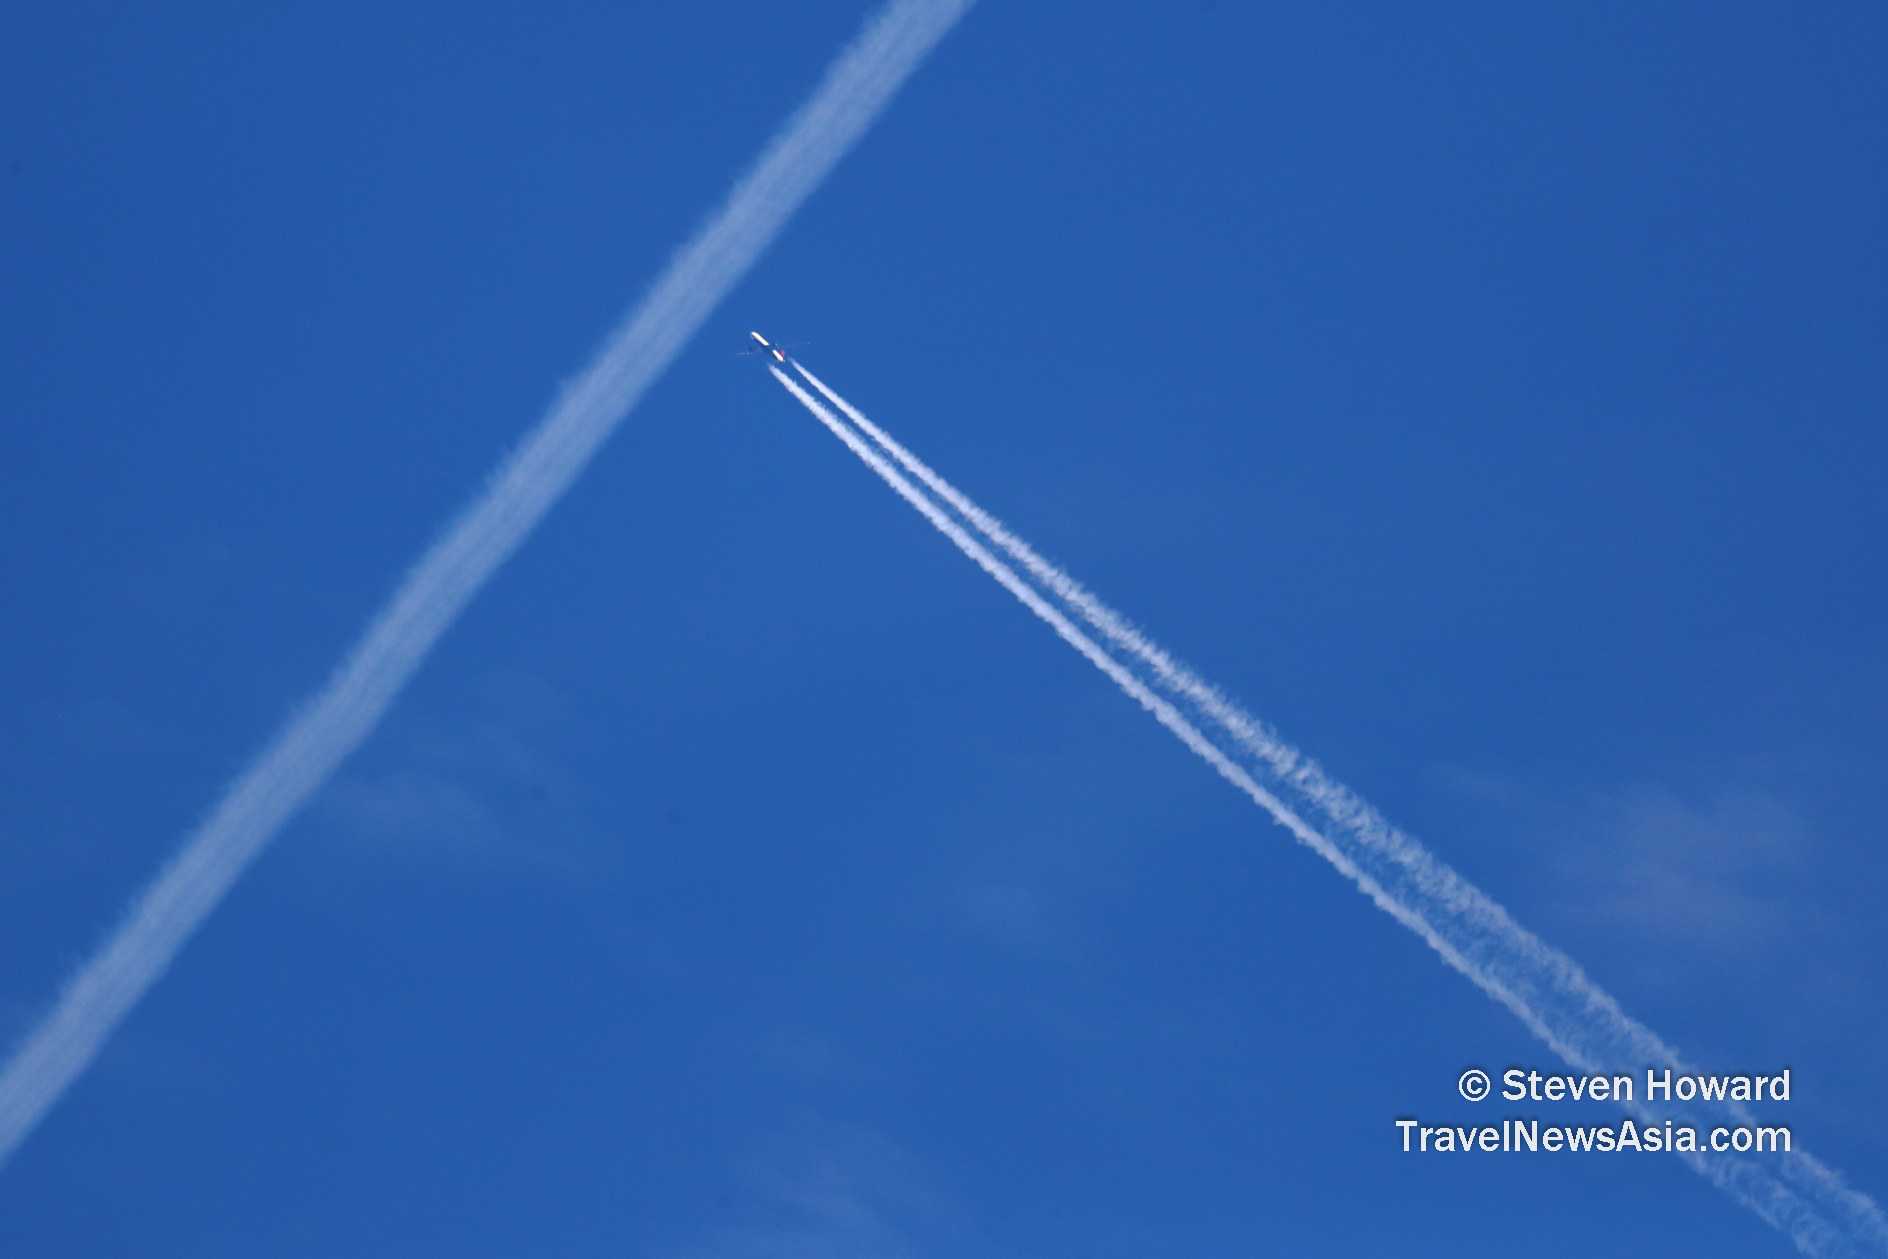 Delta A330-900 reg: N407DX at 34,000 feet between CDG and SLC. Picture by Steven Howard of TravelNewsAsia.com Click to enlarge.